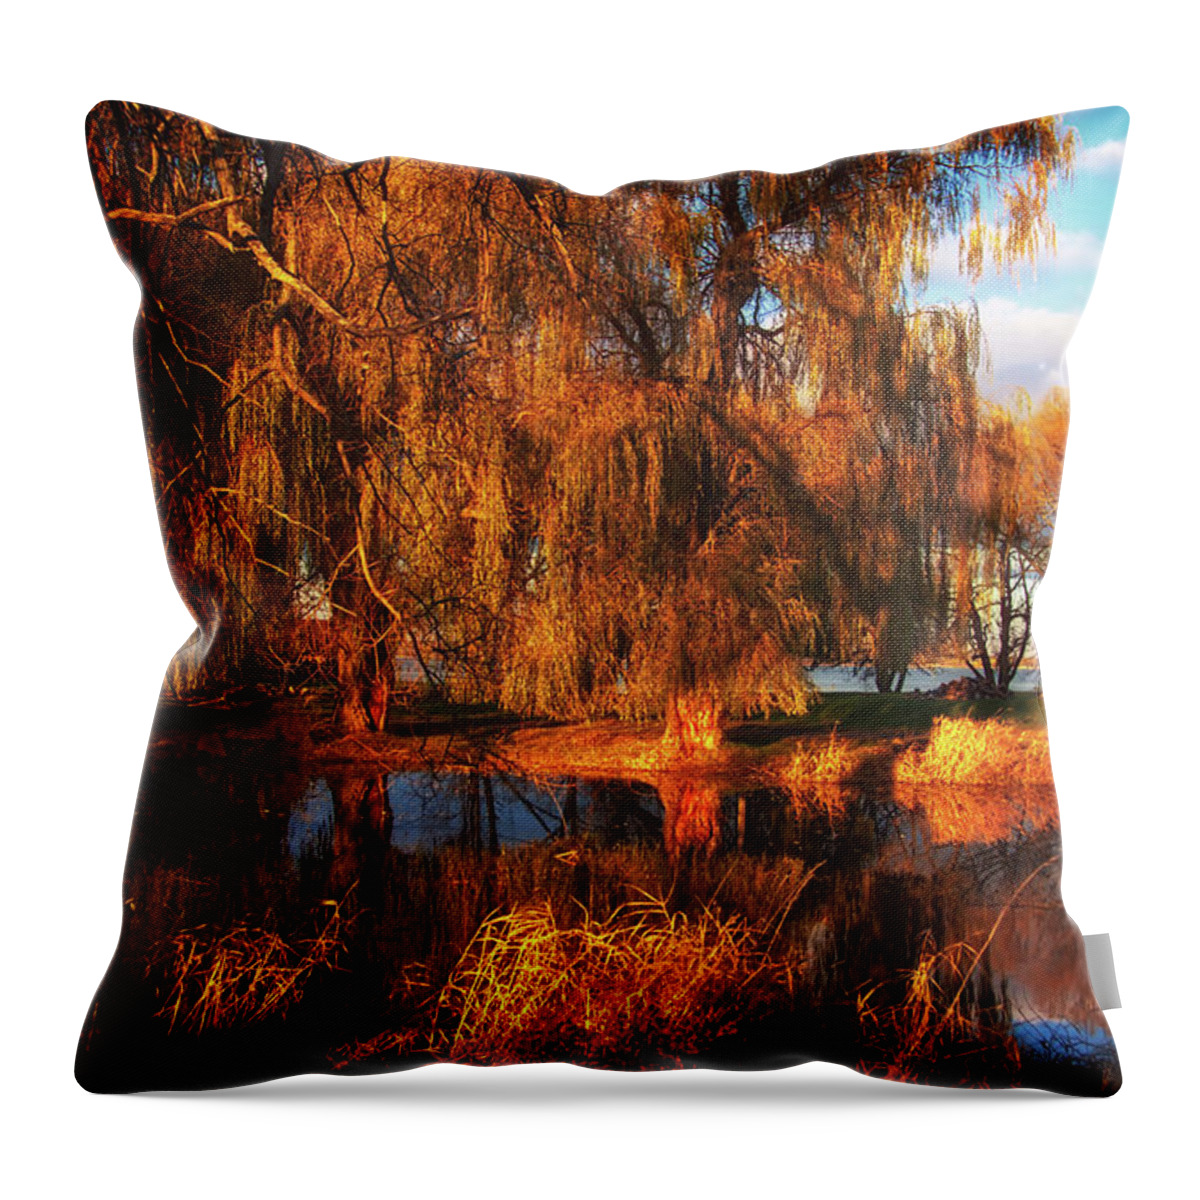 Orange Throw Pillow featuring the photograph Fiery orange by Tatiana Travelways